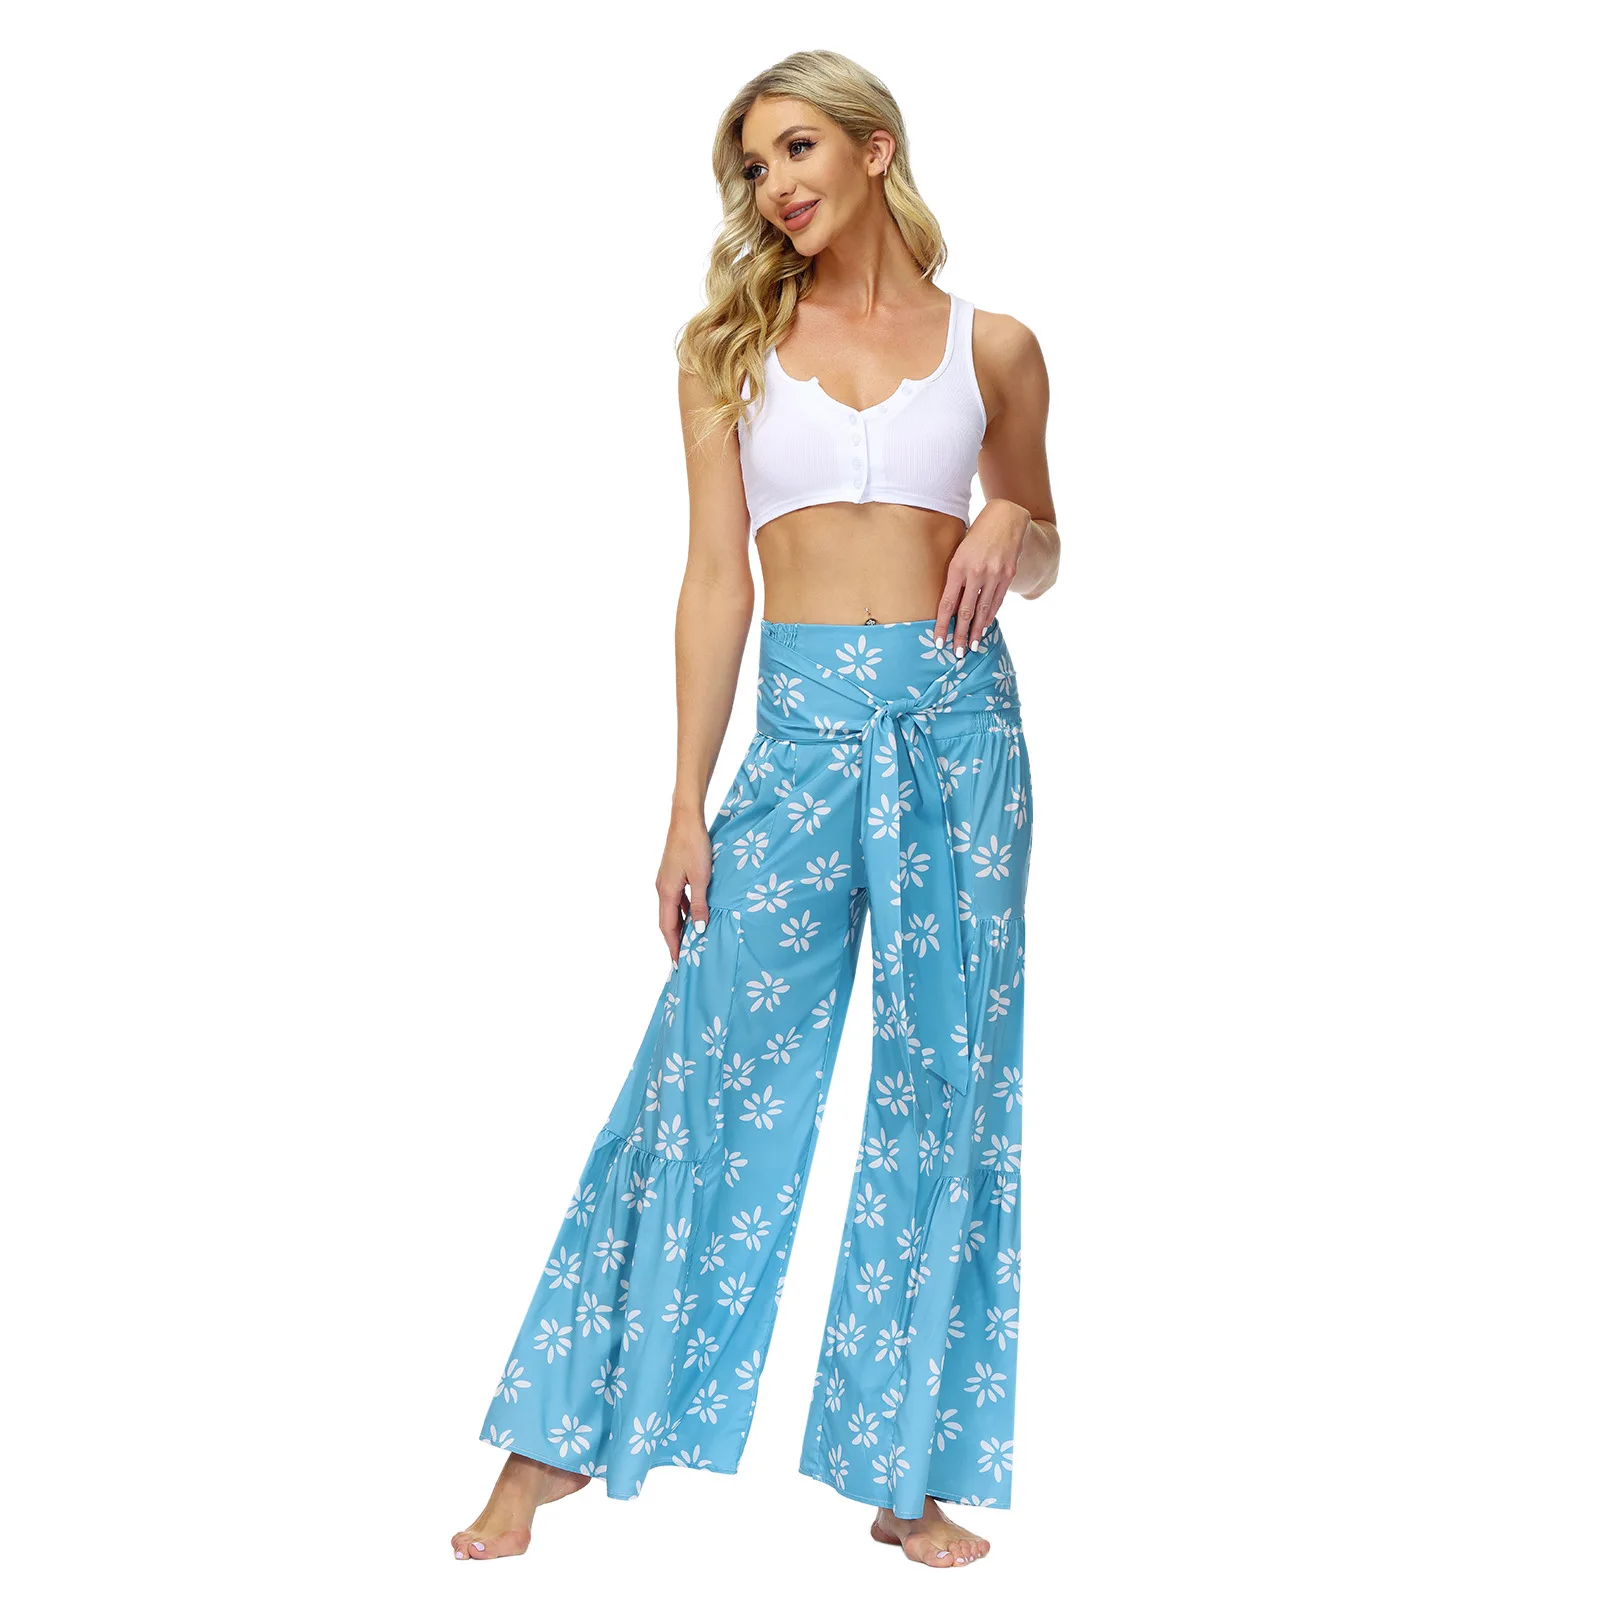 

Summer Casual Floral Print Women Fashion Pants Elastic Belted High Waist Wide Leg Pants Beach Wide-Leg Pants With Straps